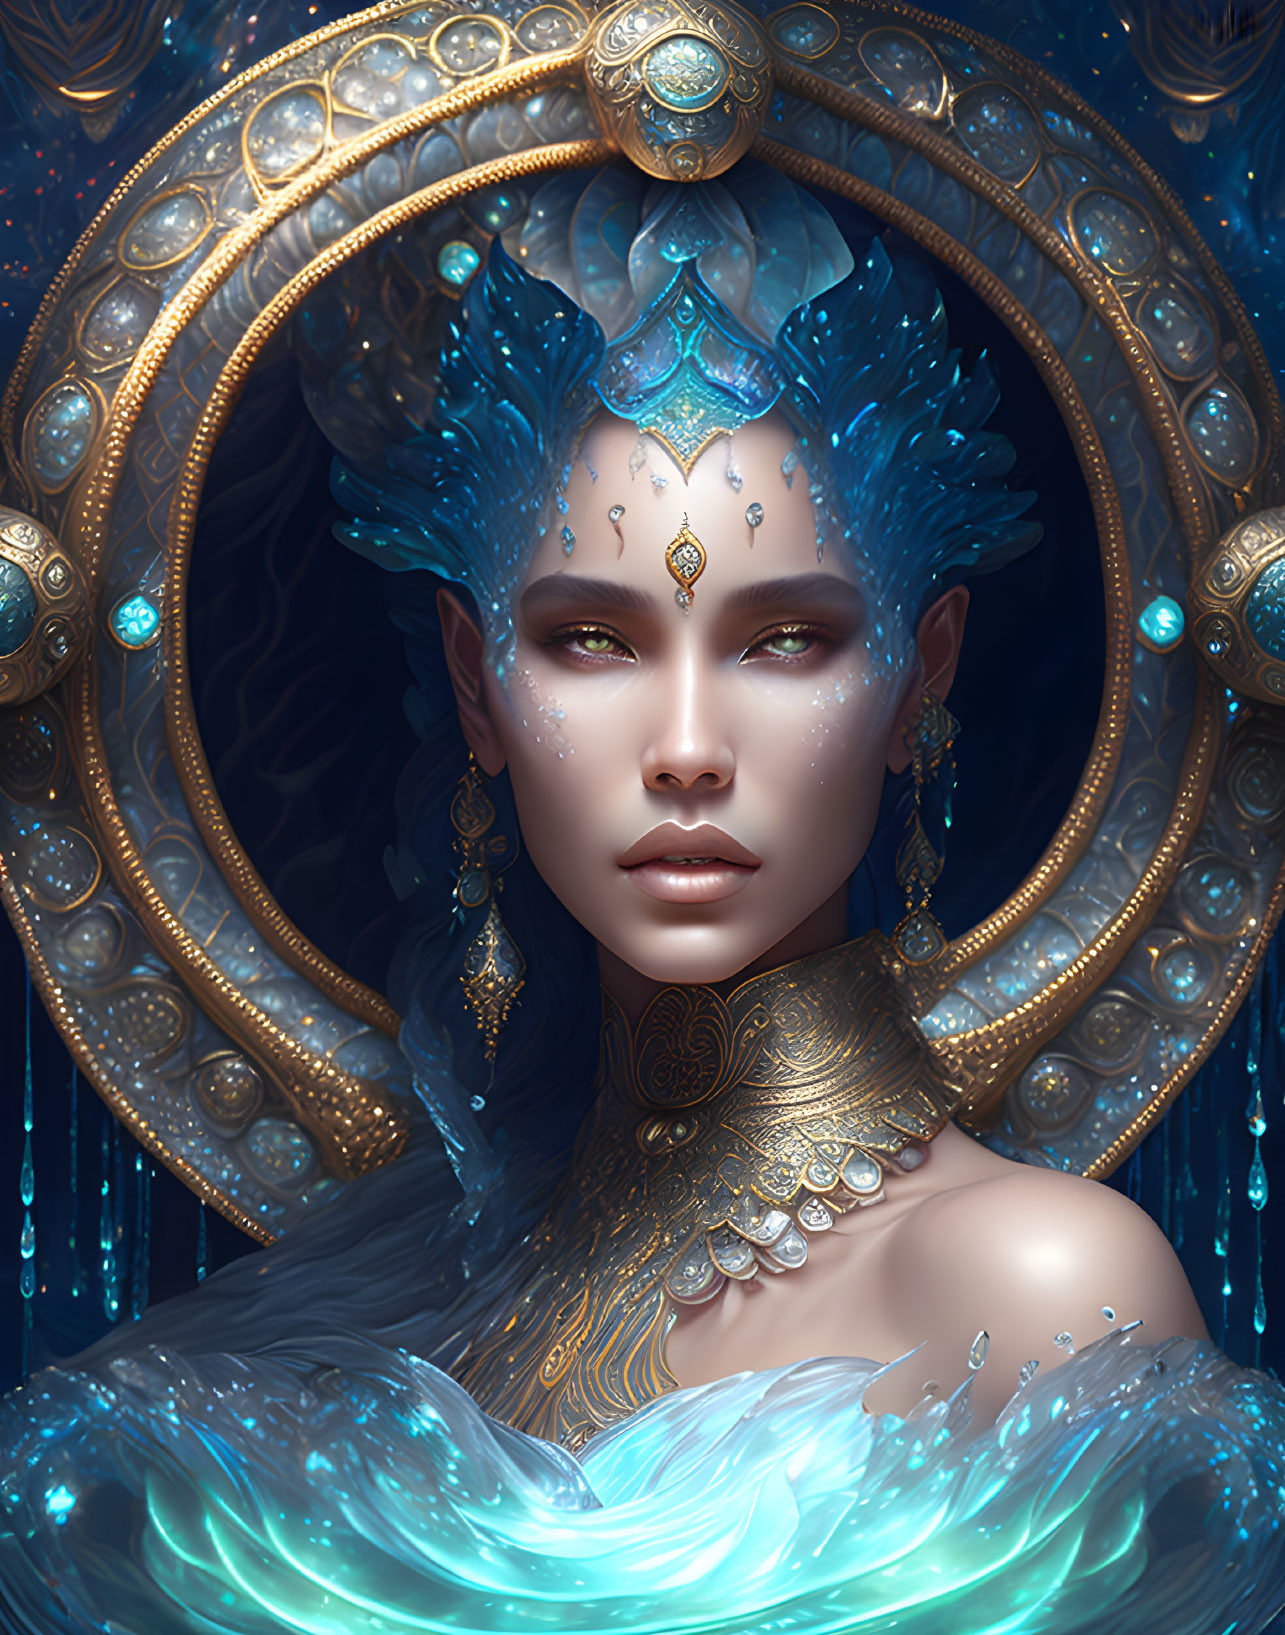 Fantasy illustration: blue-skinned woman with jeweled headdress in cosmic setting